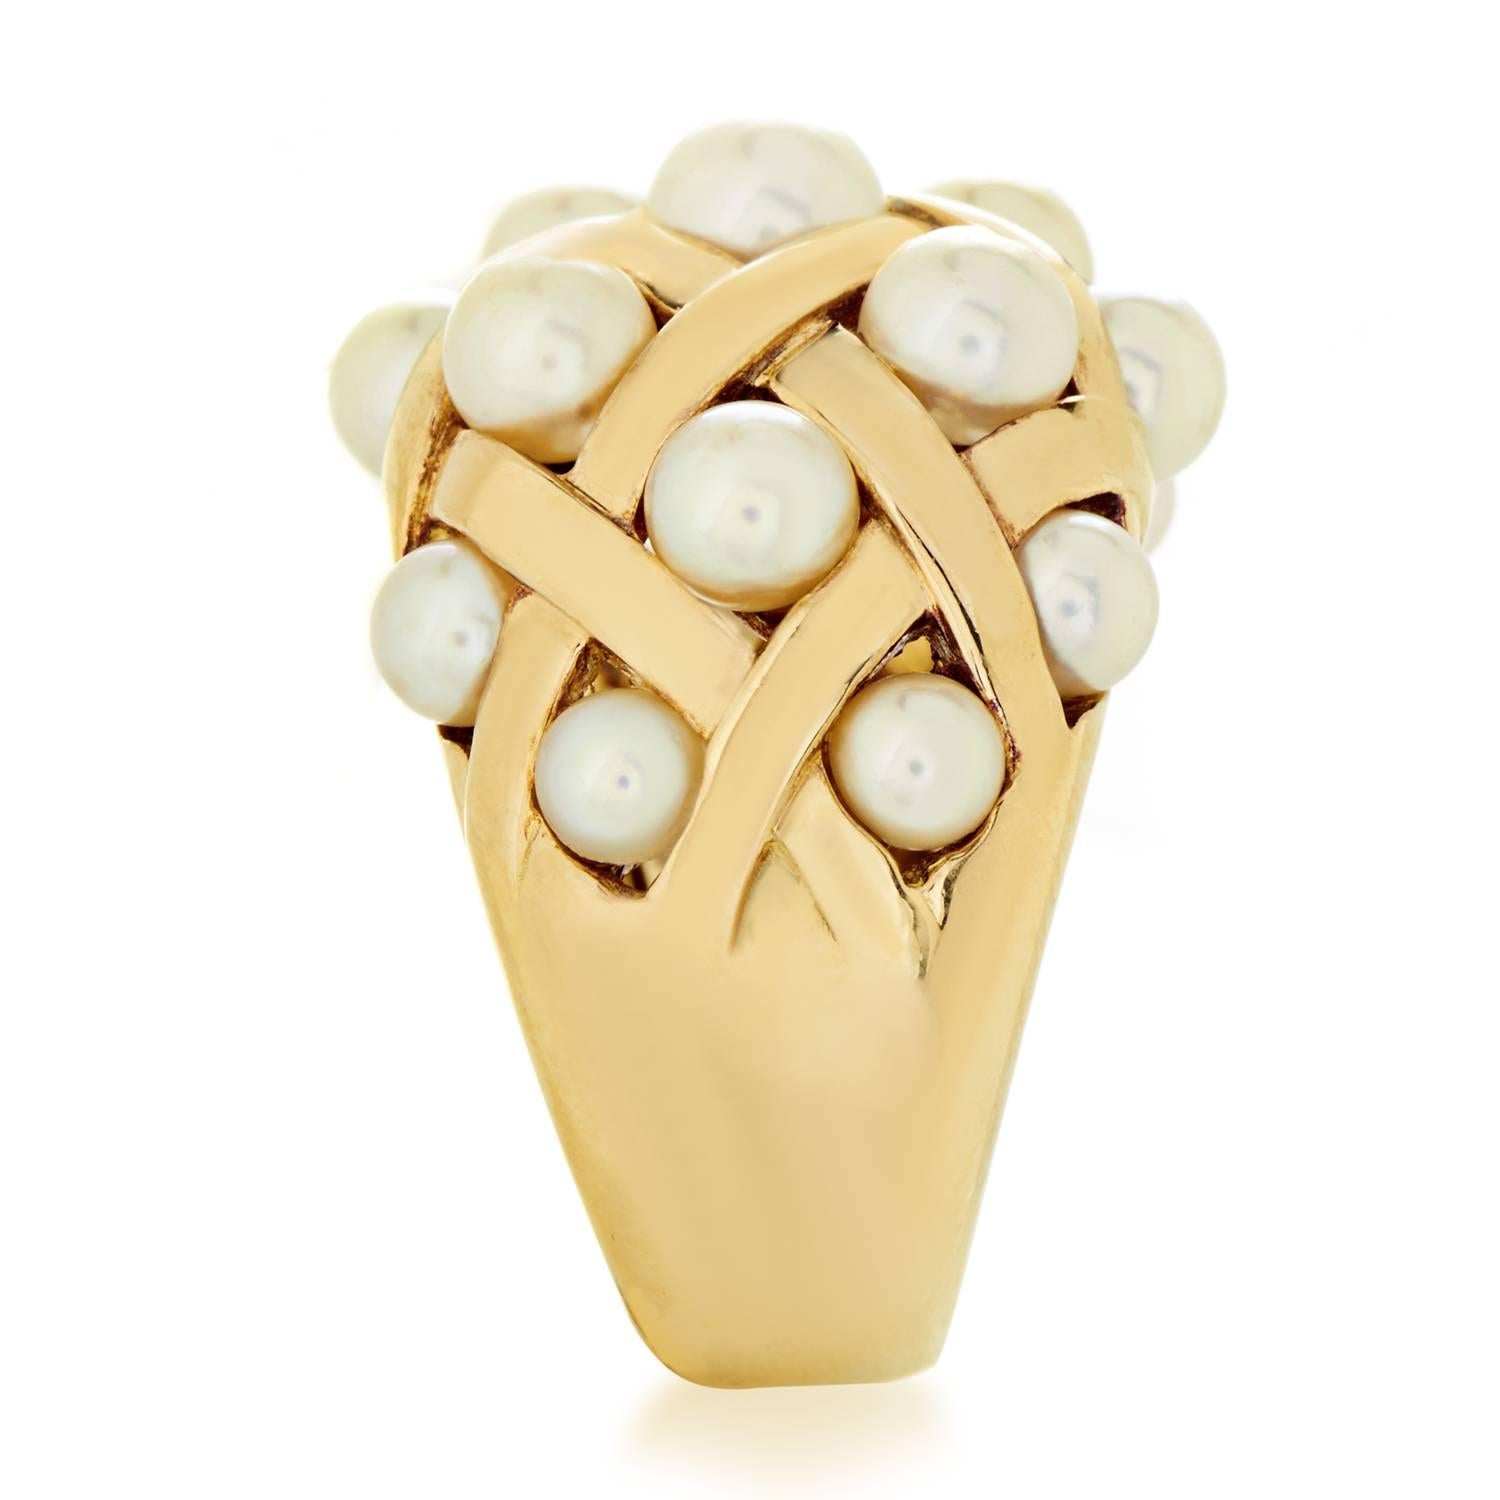 The wonderful weaved pattern of gorgeous 18K yellow gold and sheer graceful allure of magnificent pearls produce a fabulous sight in this exceptional ring from Chanel’s Baroque collection which offers an intriguing and tasteful look.
Ring Top